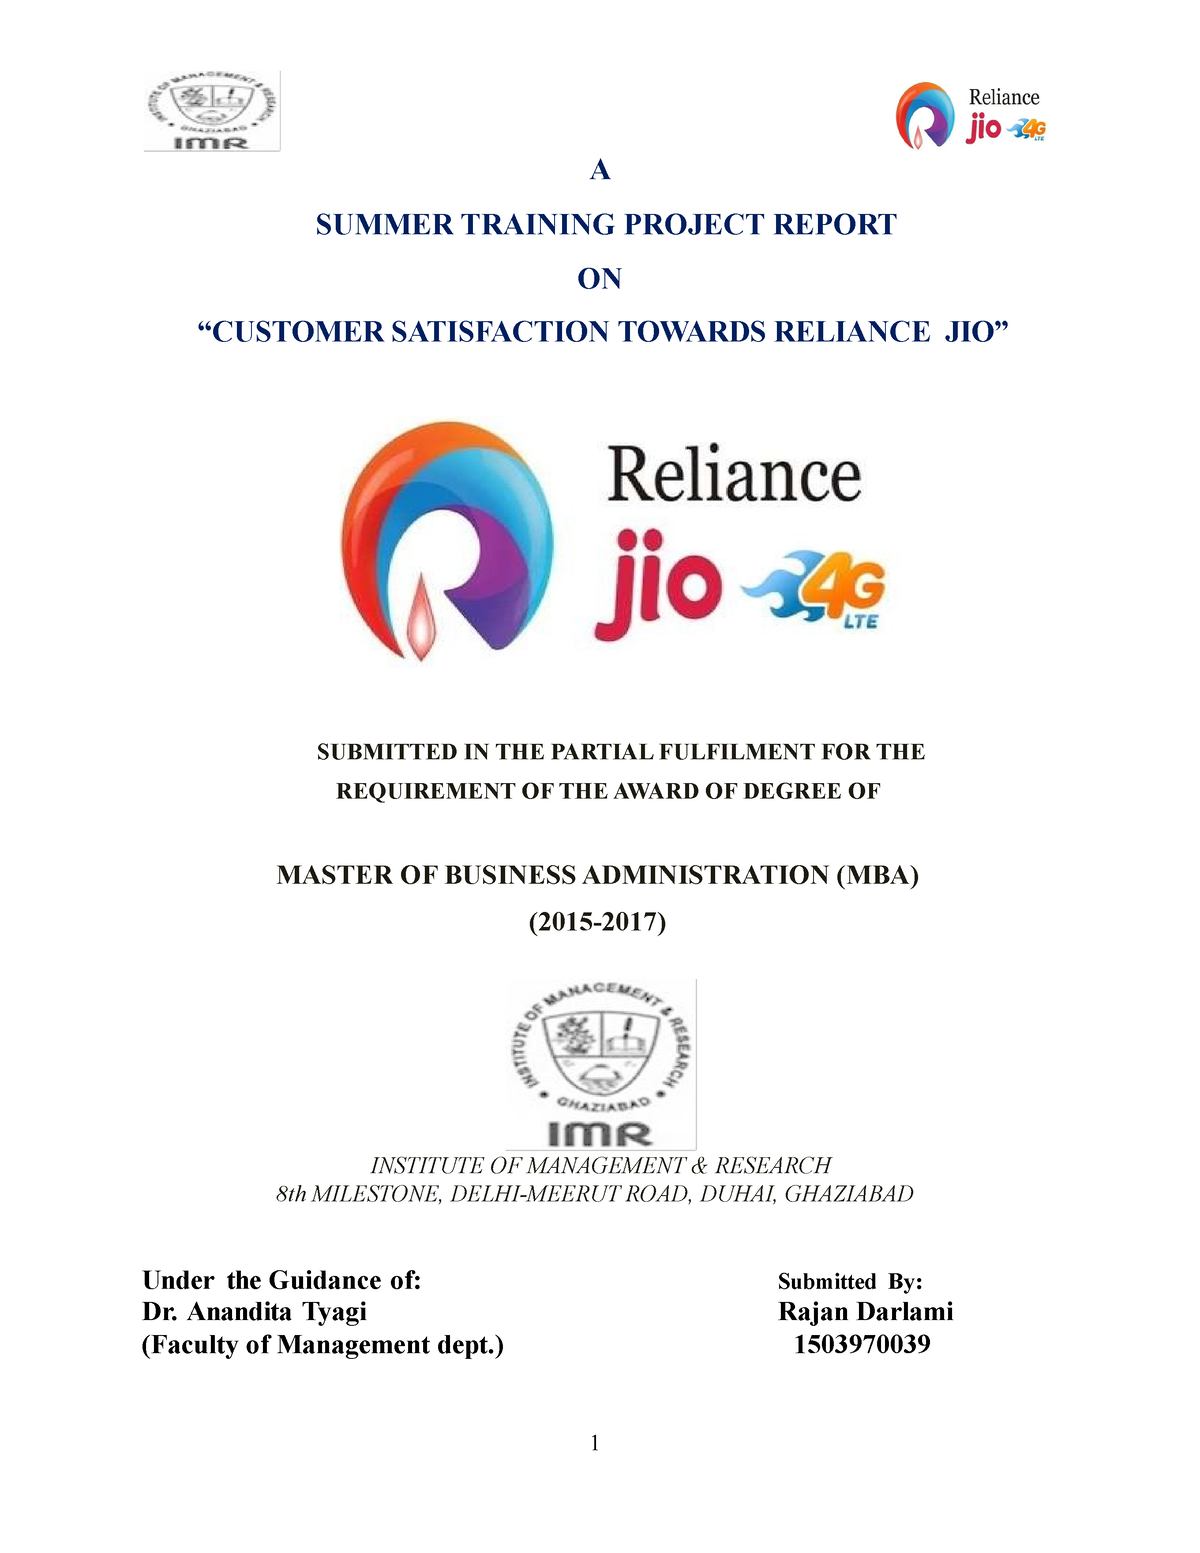 literature review on customer satisfaction of reliance jio